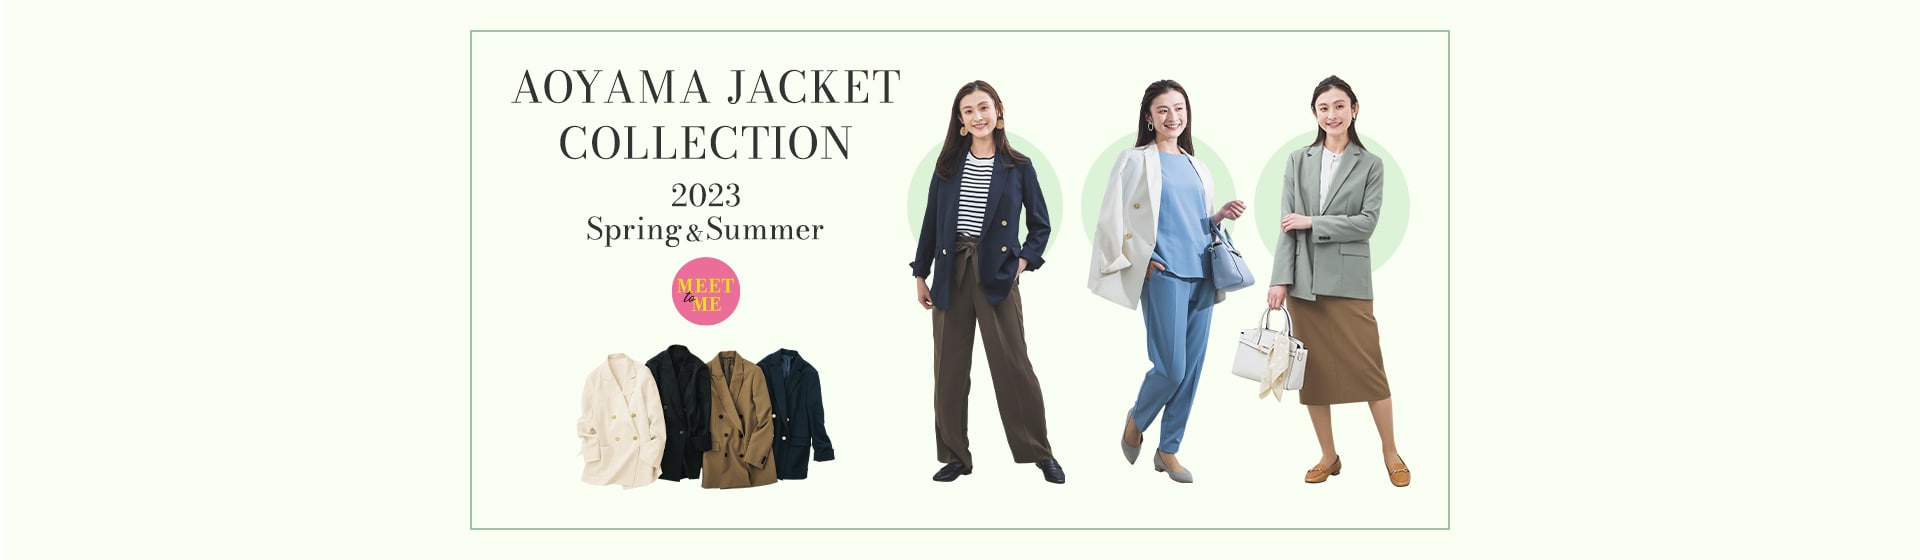 AOYAMA JACKET COLLECTION 2023 Spring & Summer